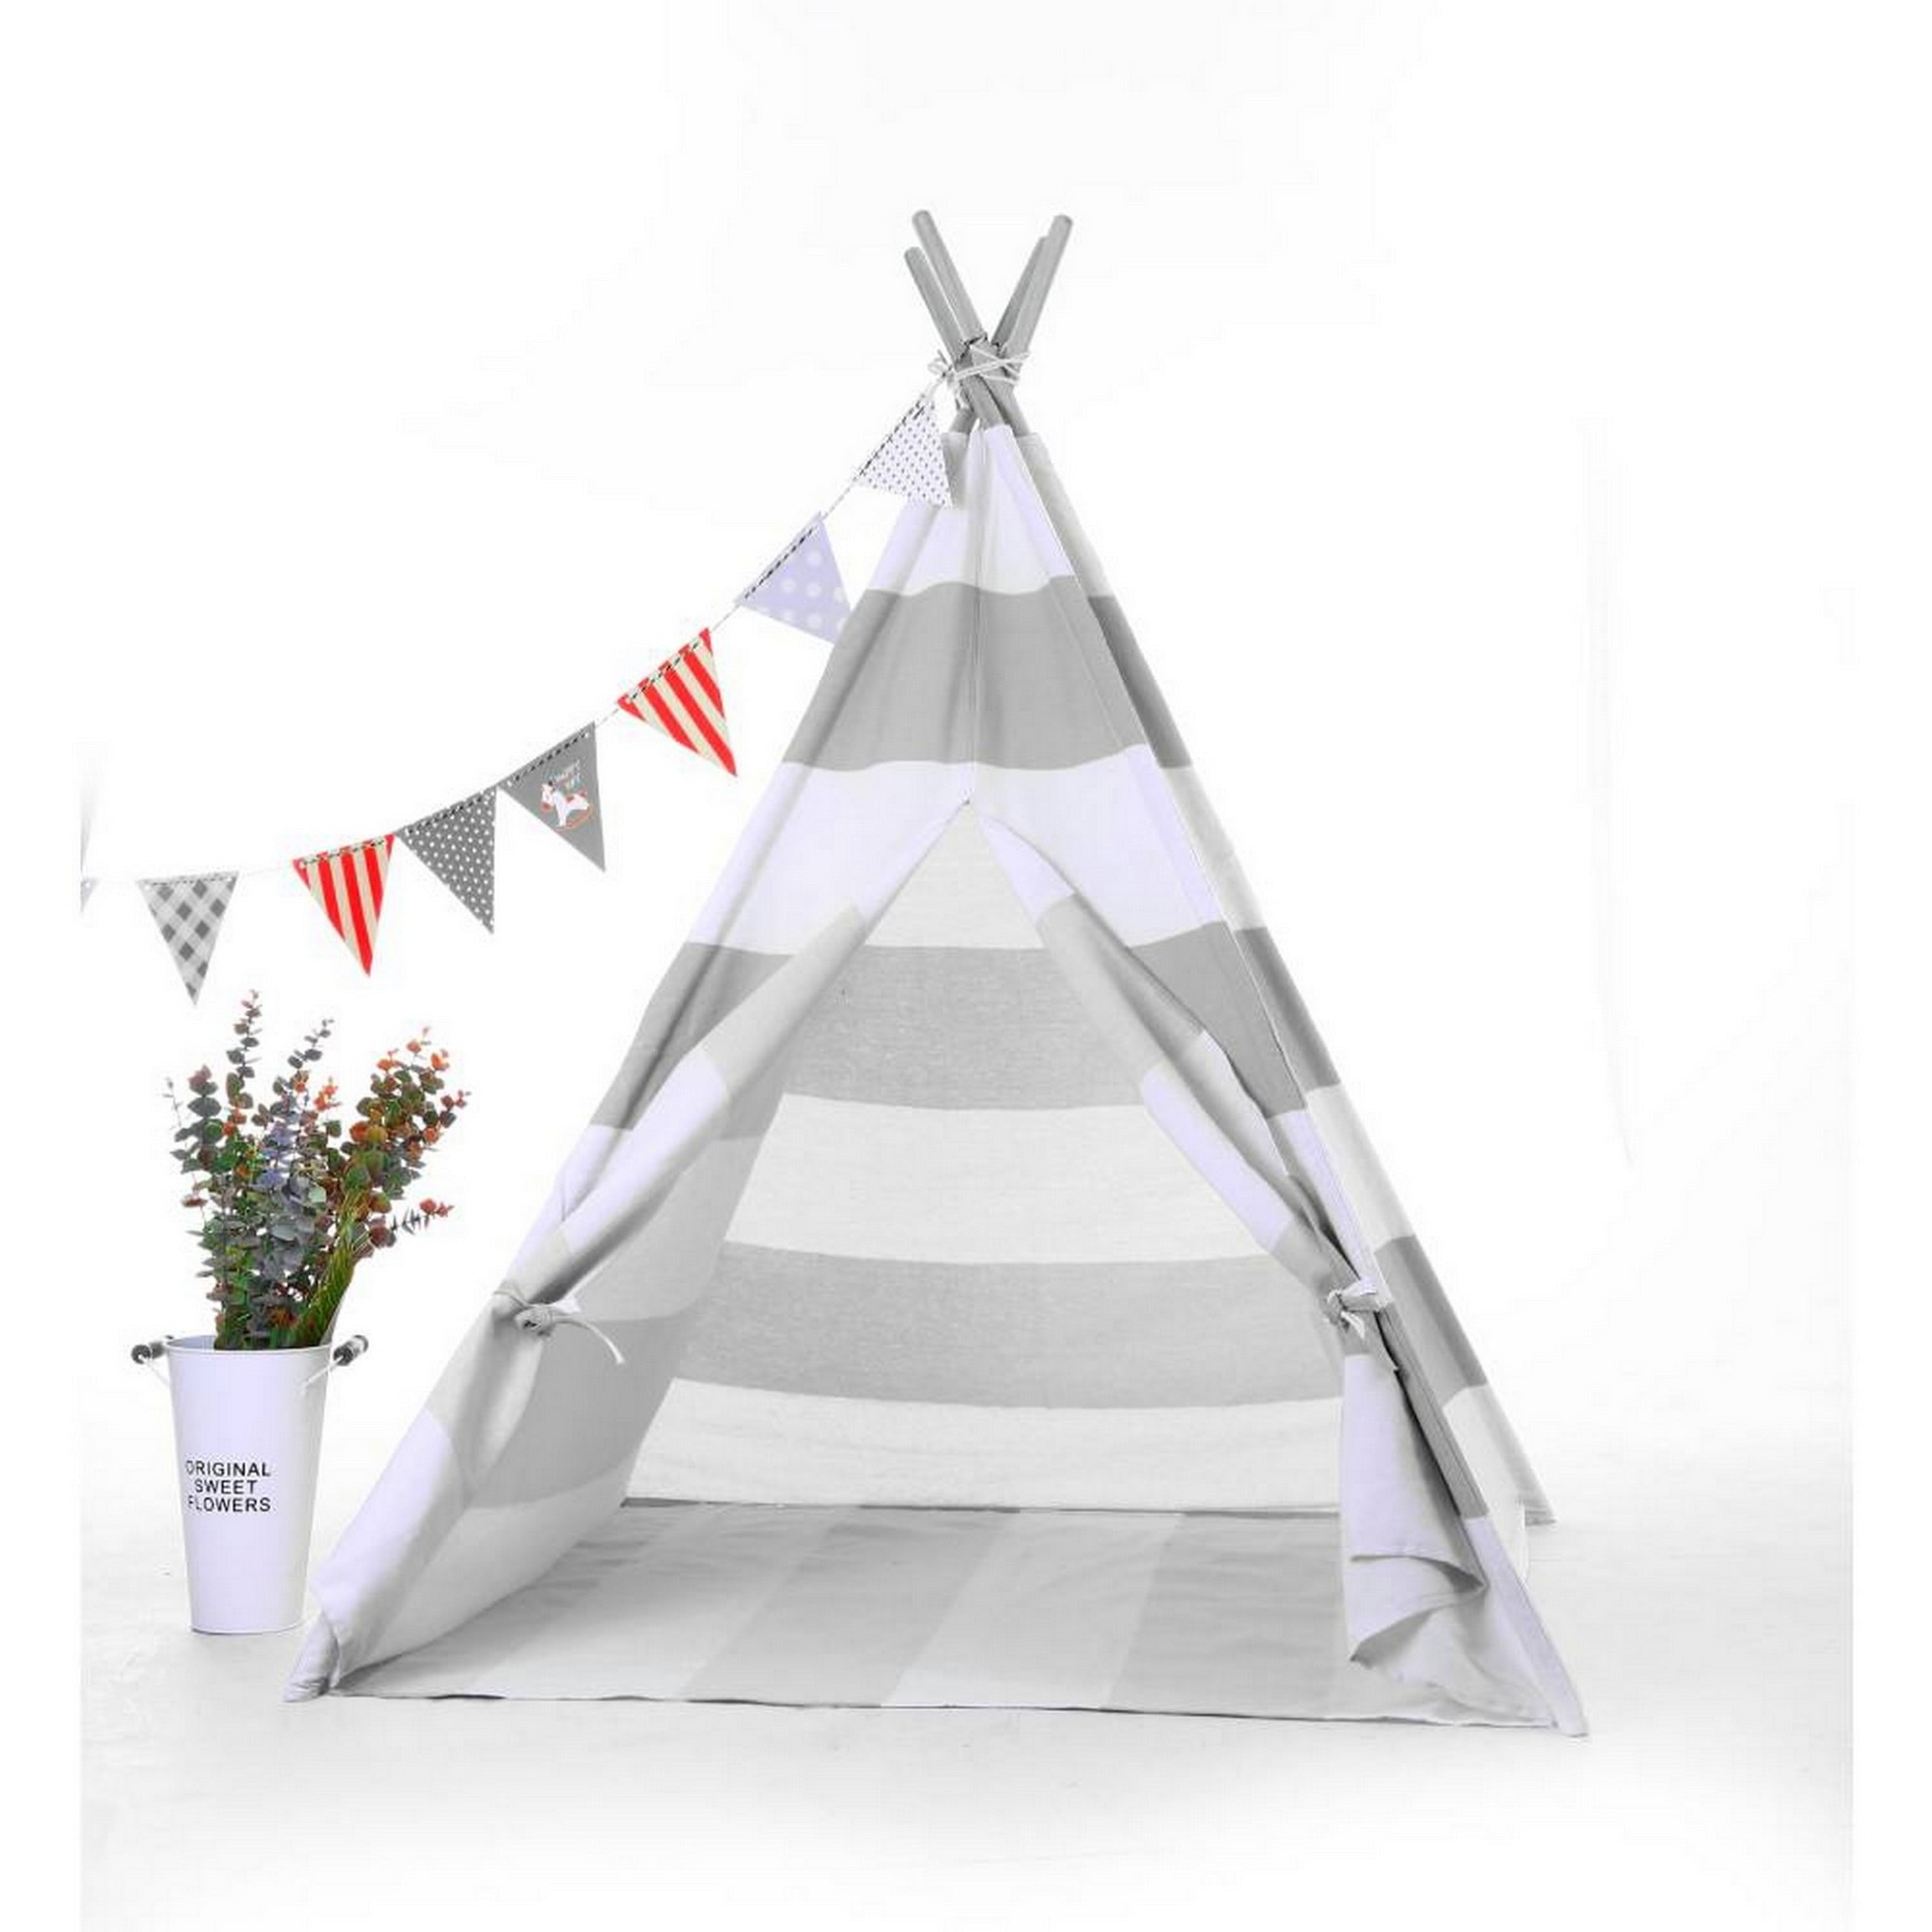 Organic Cotton Canvas Play Tent – Natural Resources: Pregnancy + Parenting